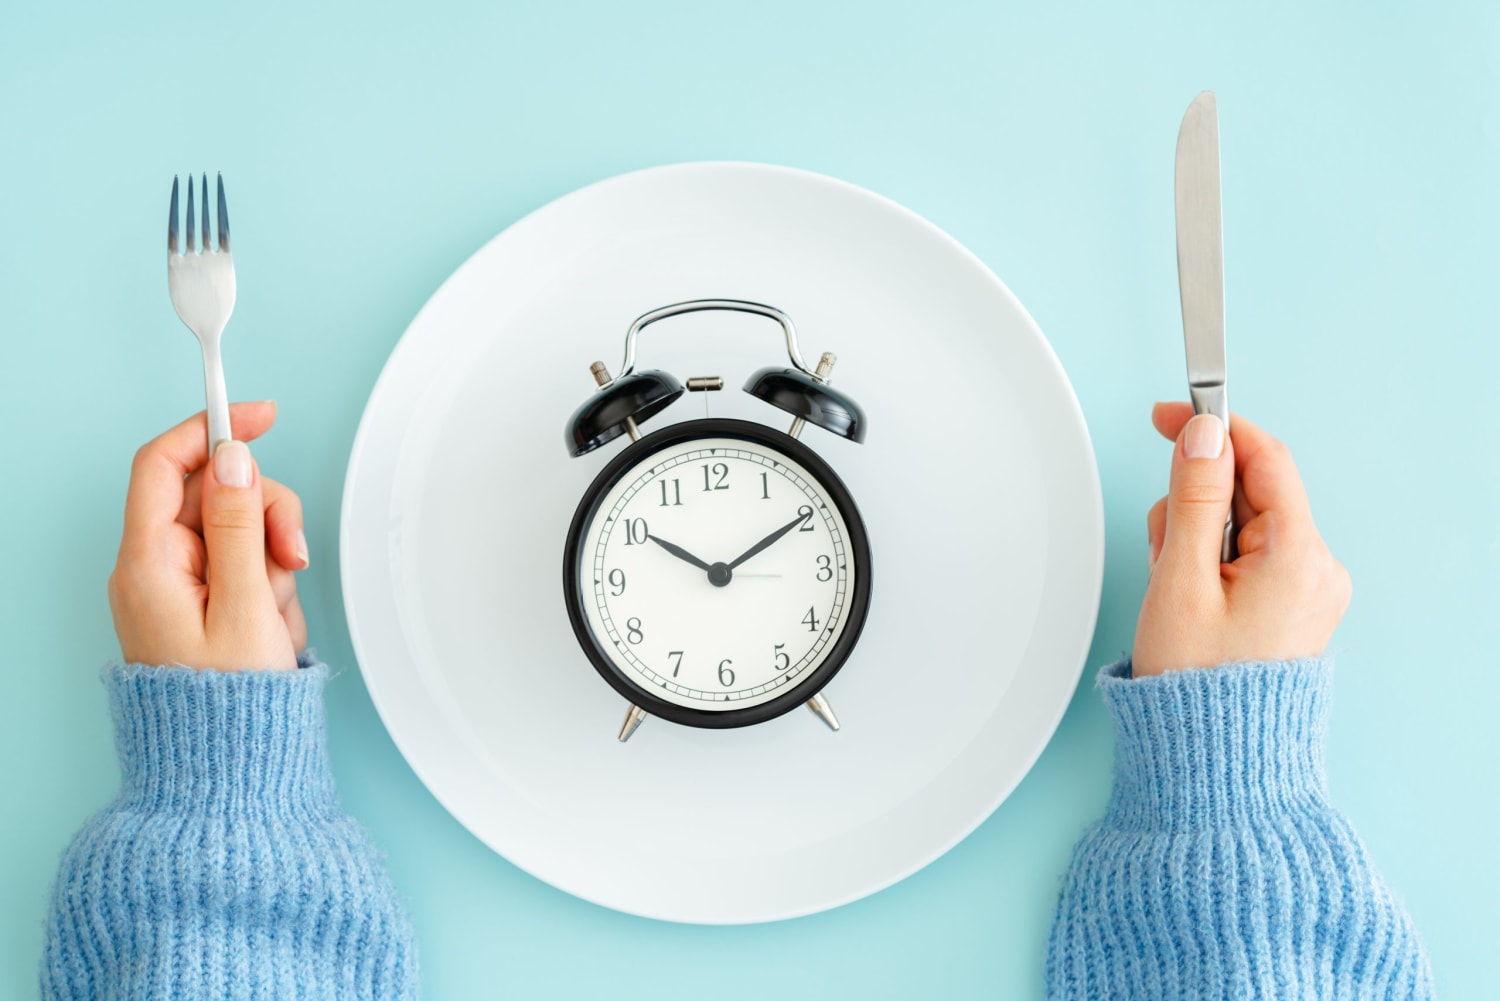 Top 5 Benefits Of Intermittent Fasting